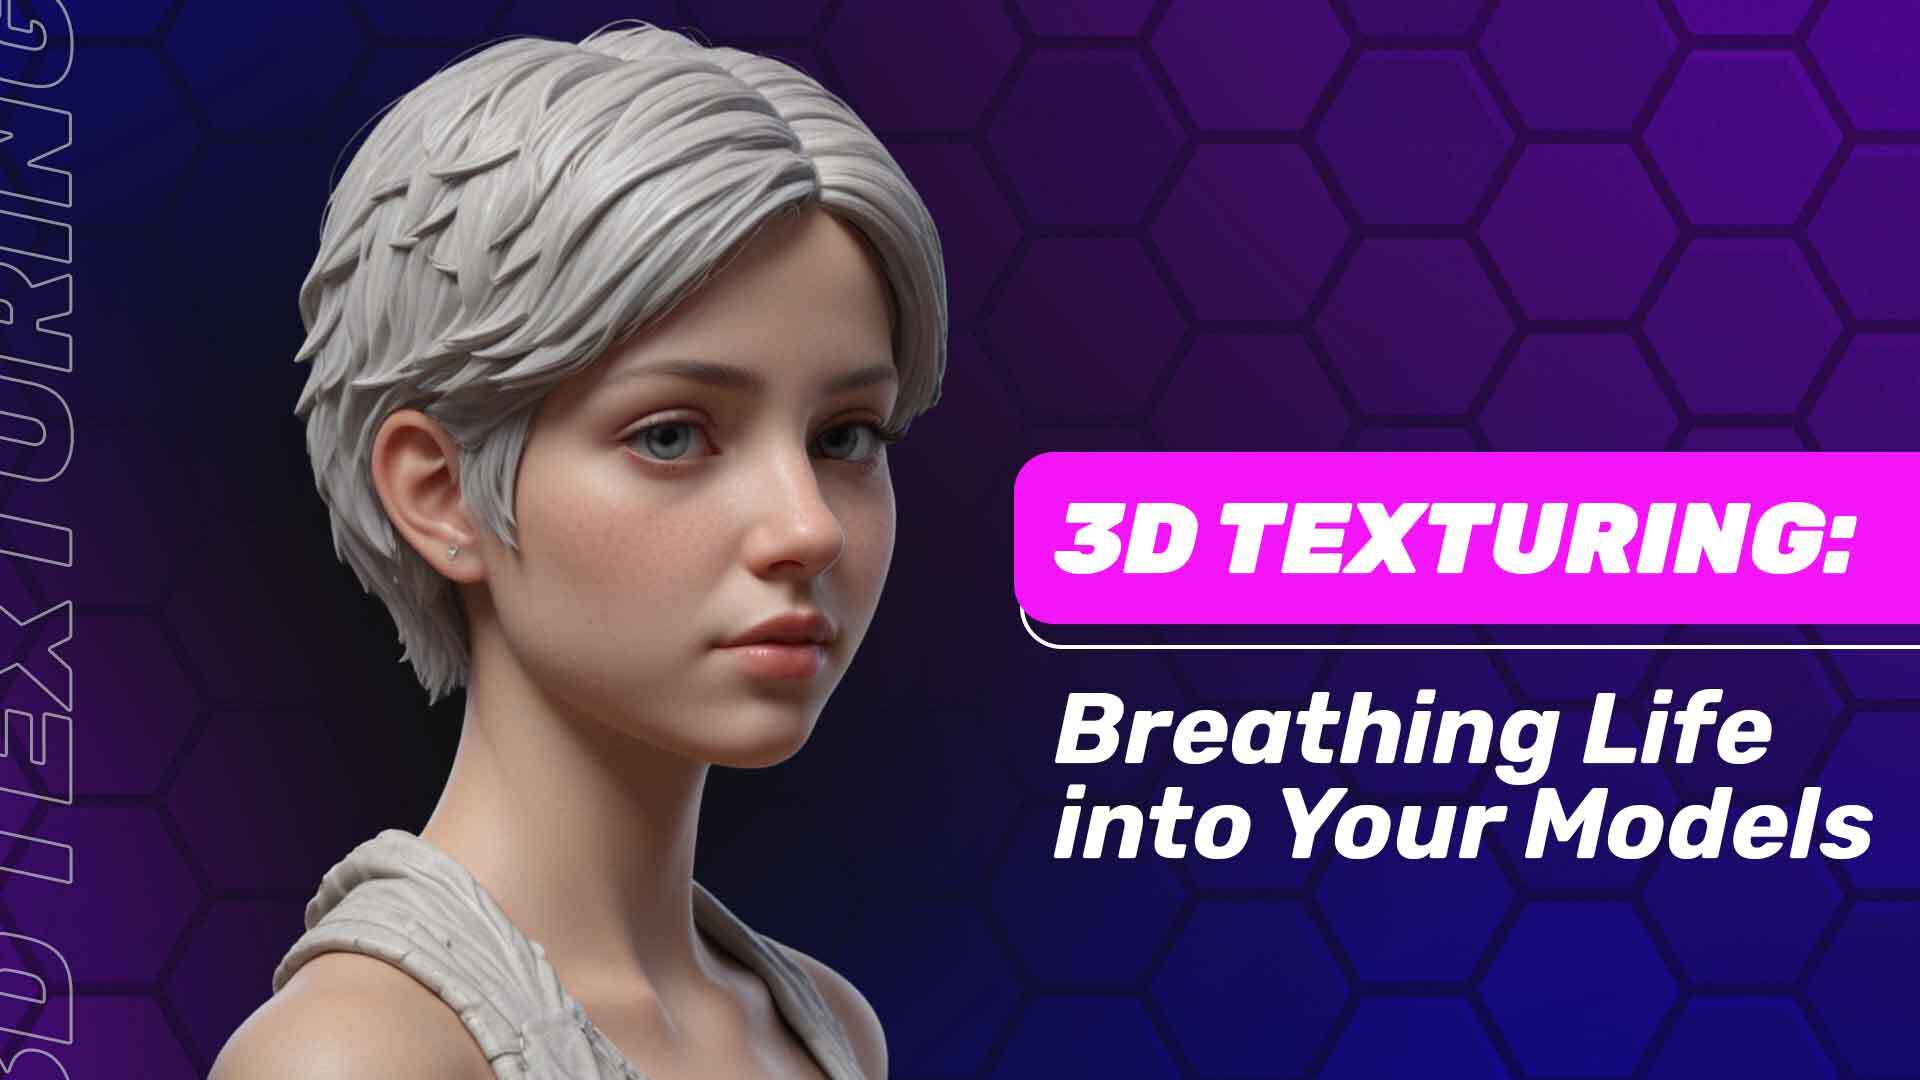 3D Texturing: Breathing Life into Your Models